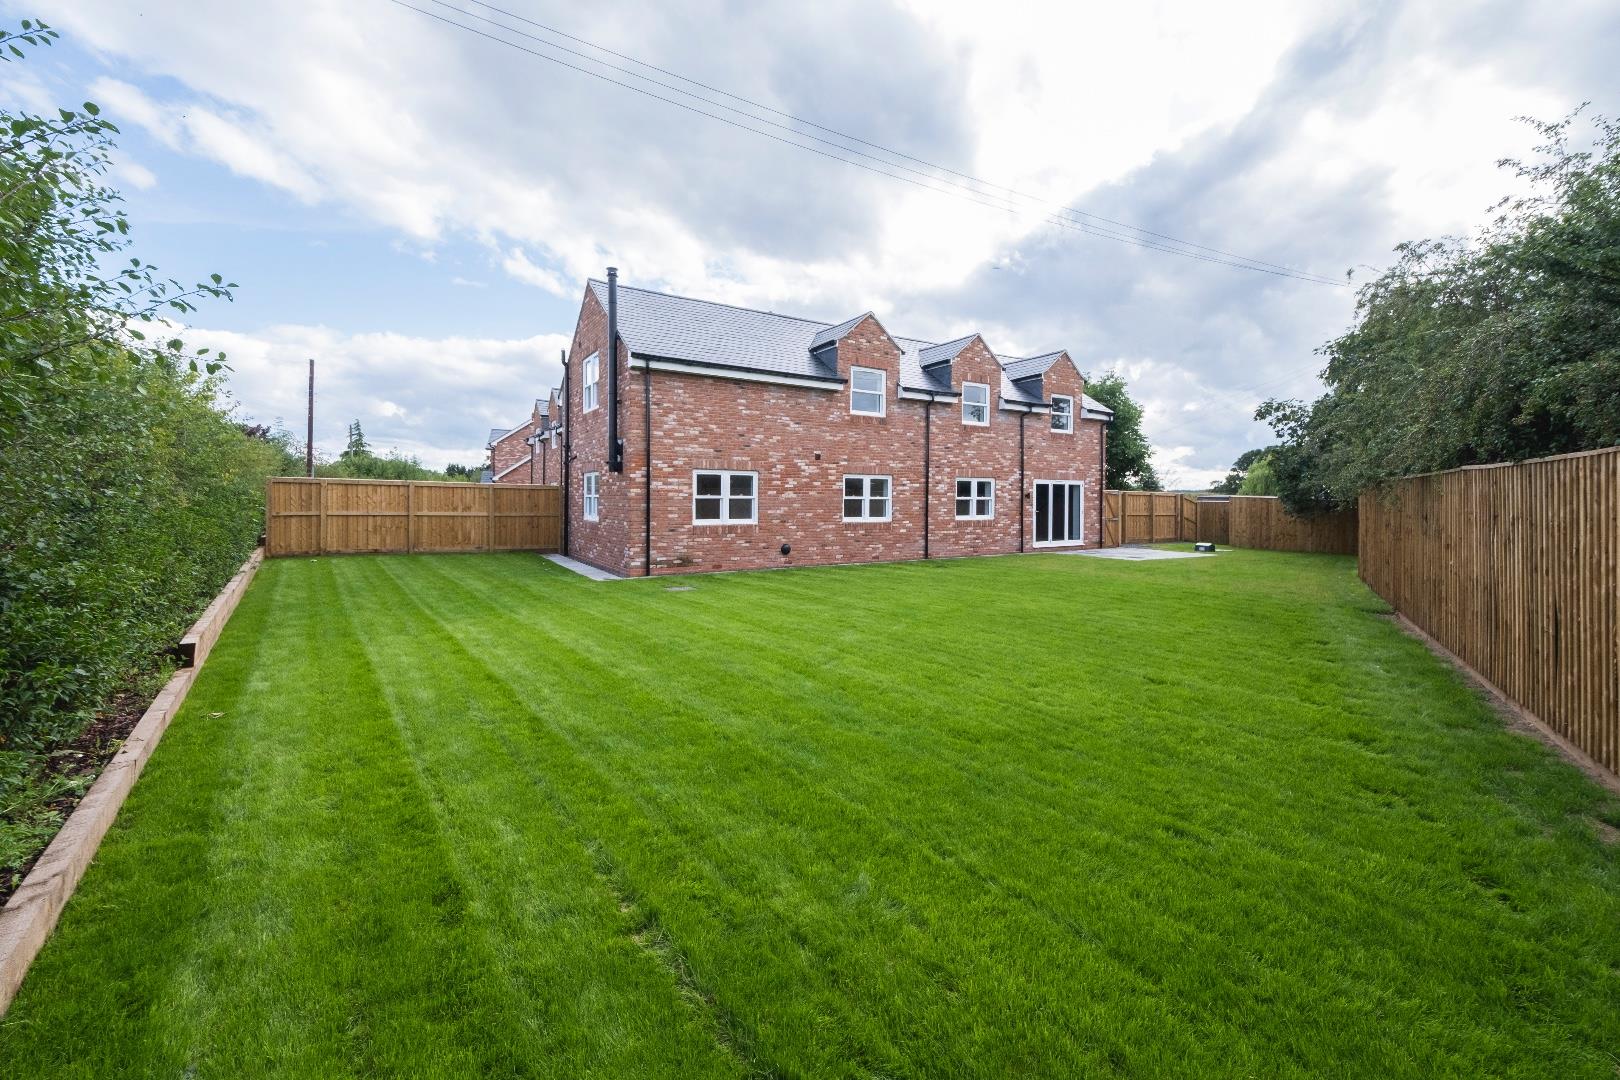 4 bedroom  Semi Detached House for Sale in Wettenhall